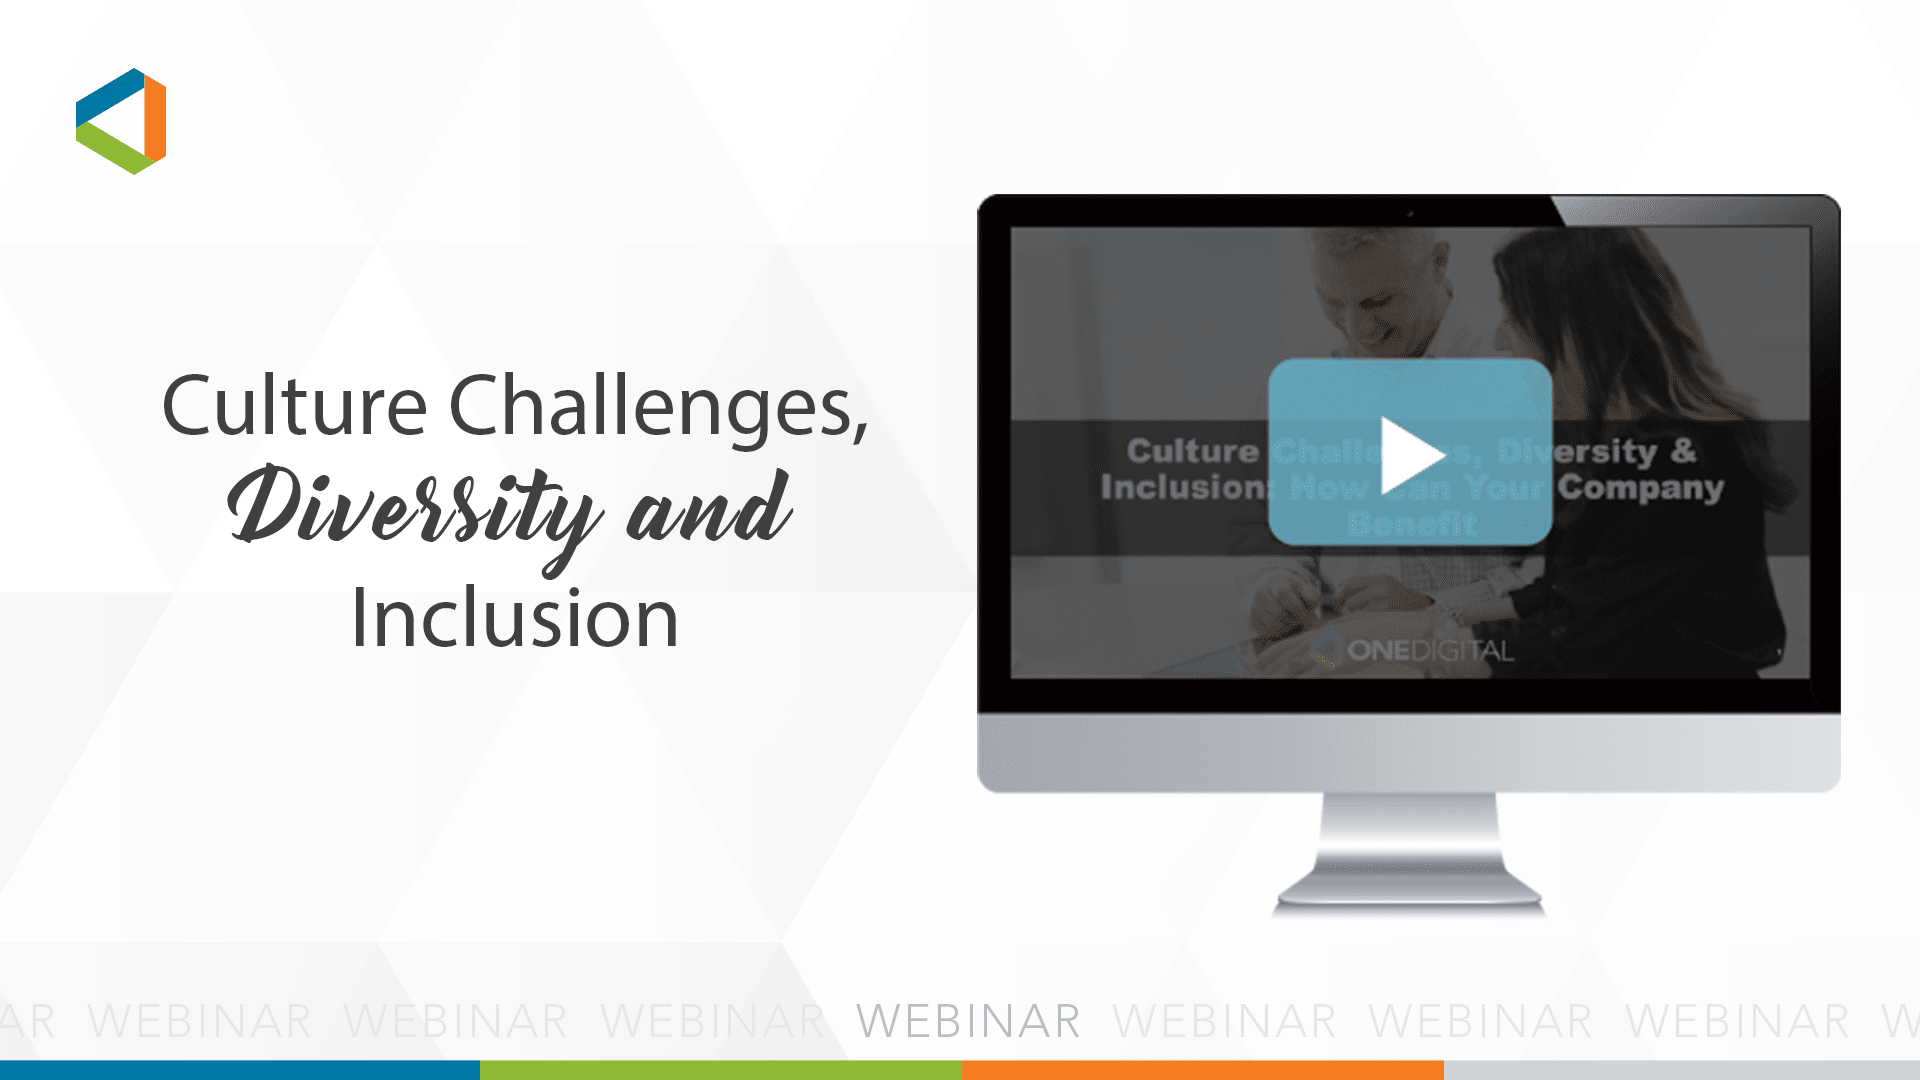 Watch the Cultural Challenges, Diversity & Inclusion: How Can Your Company Benefit? Webinar Now